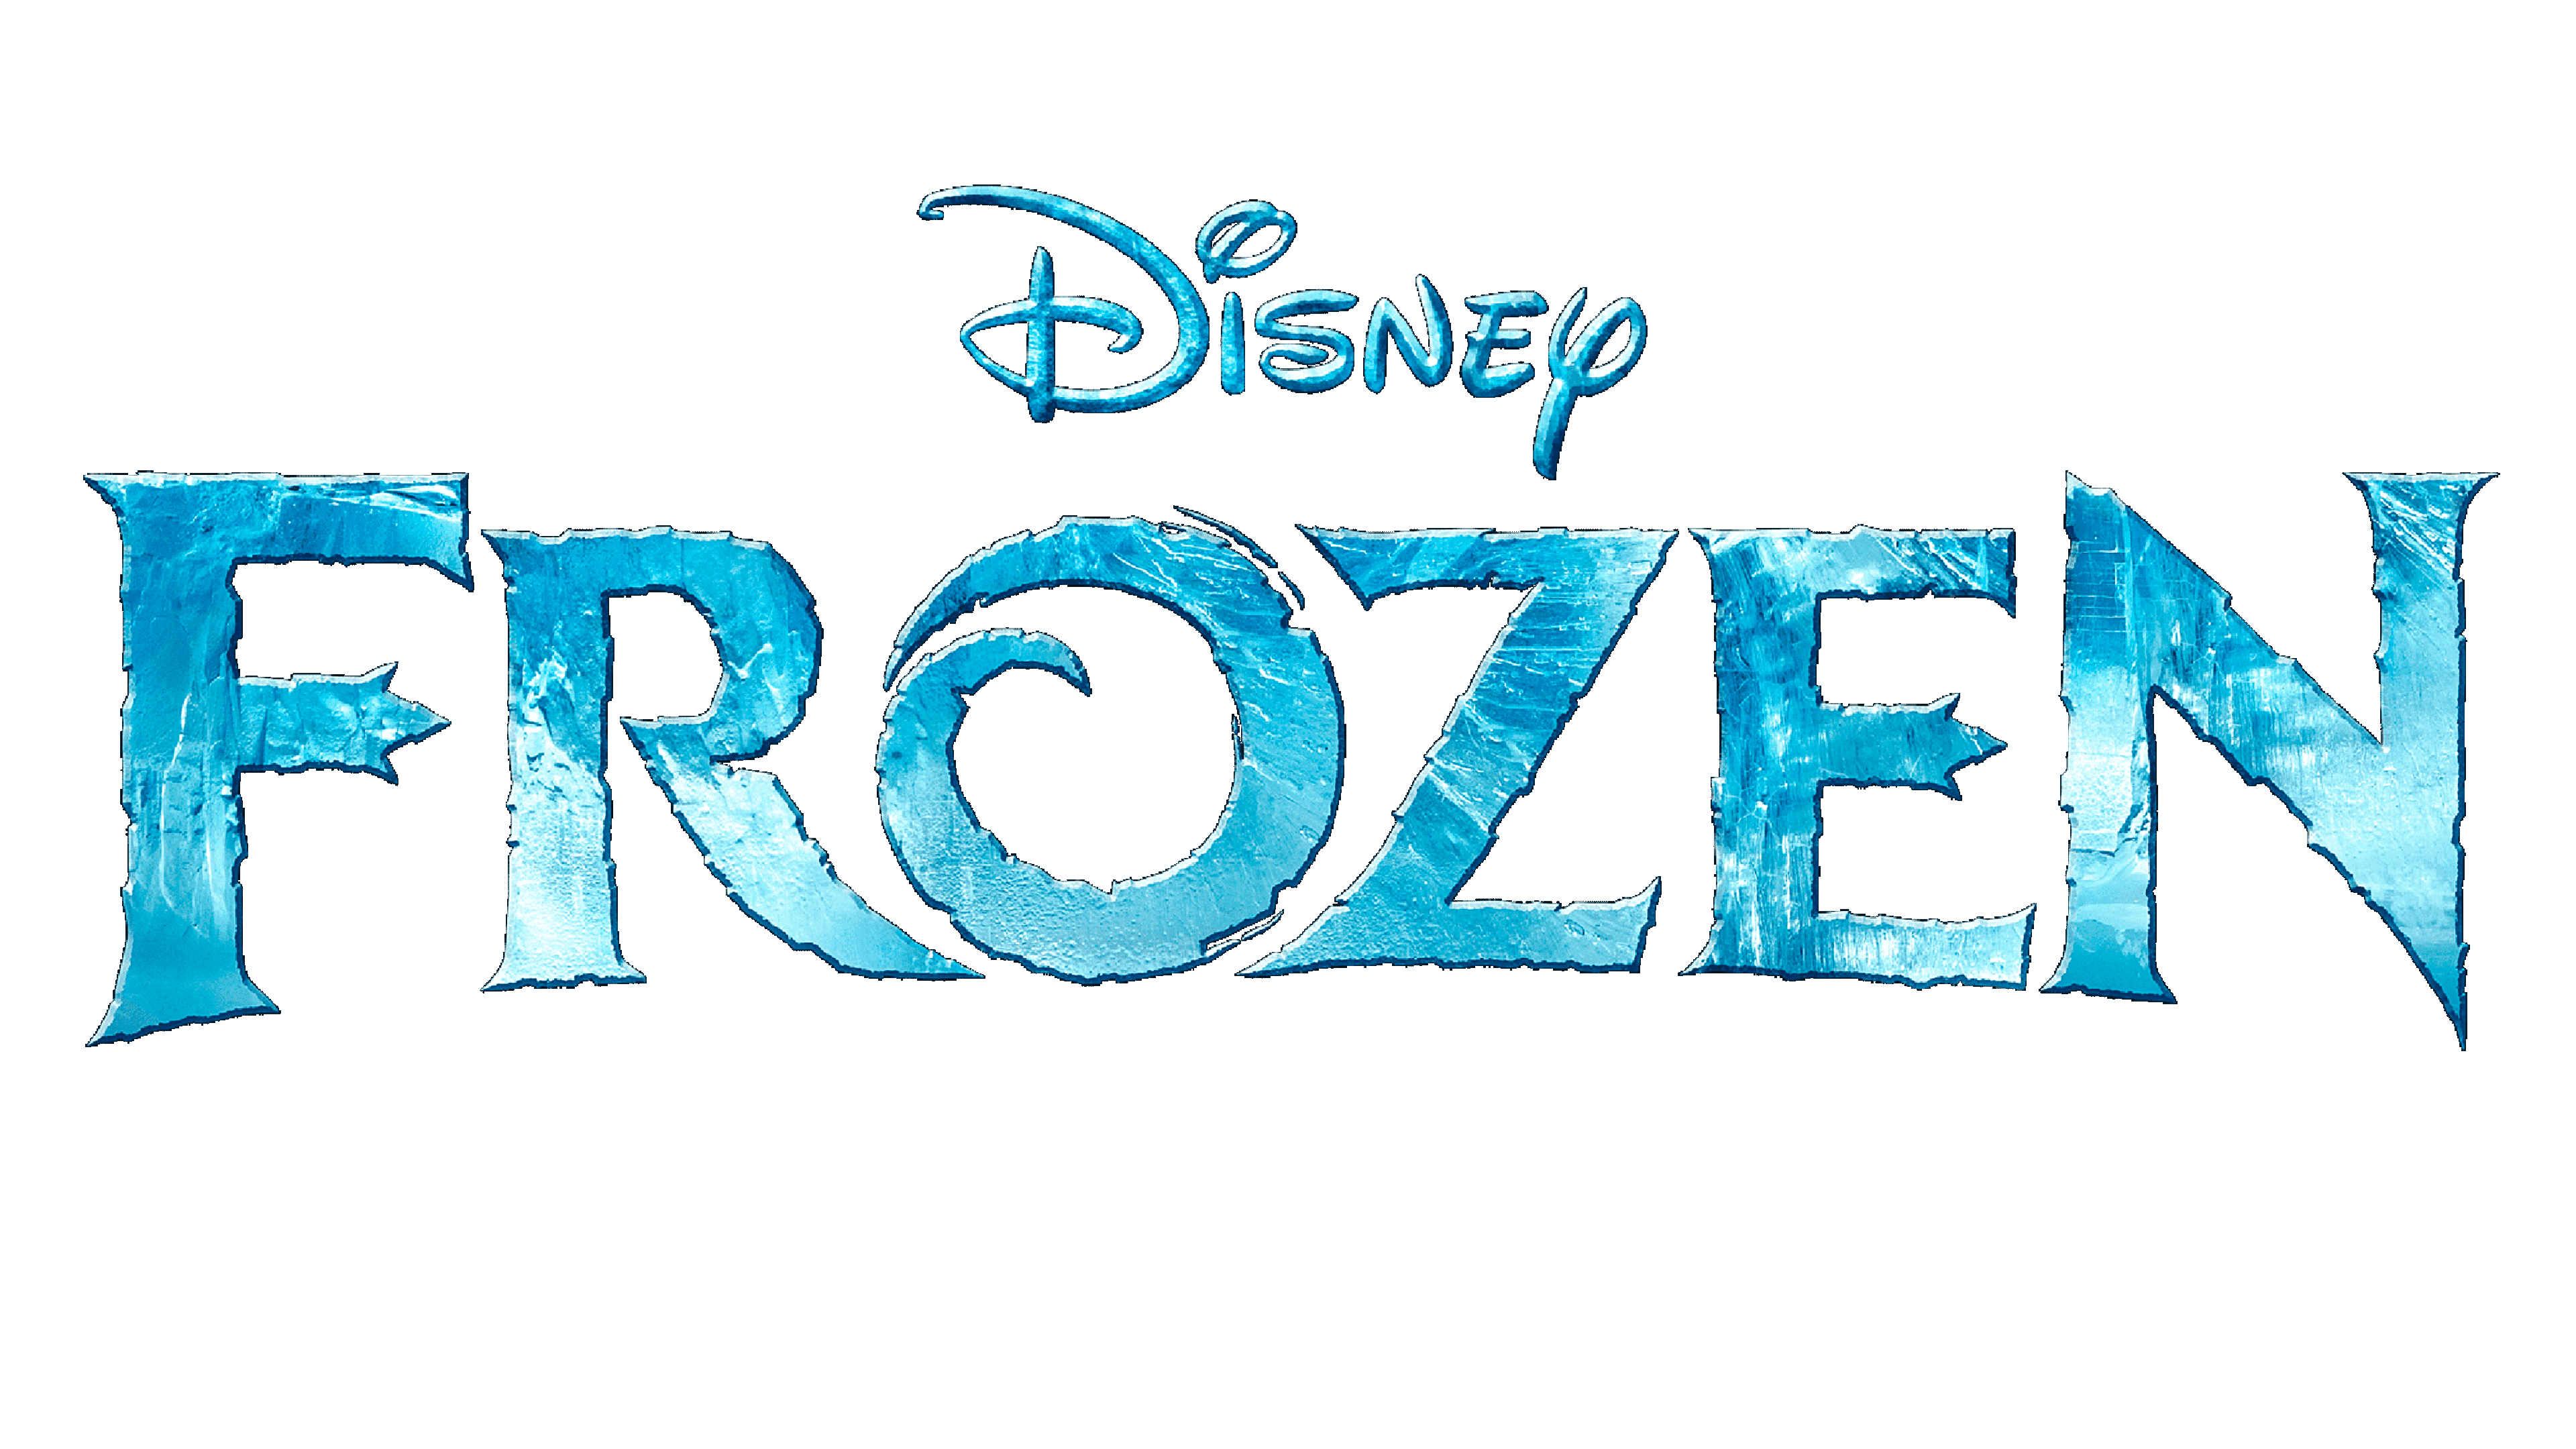 Frozen' is now the most successful animated movie of all time - The Verge